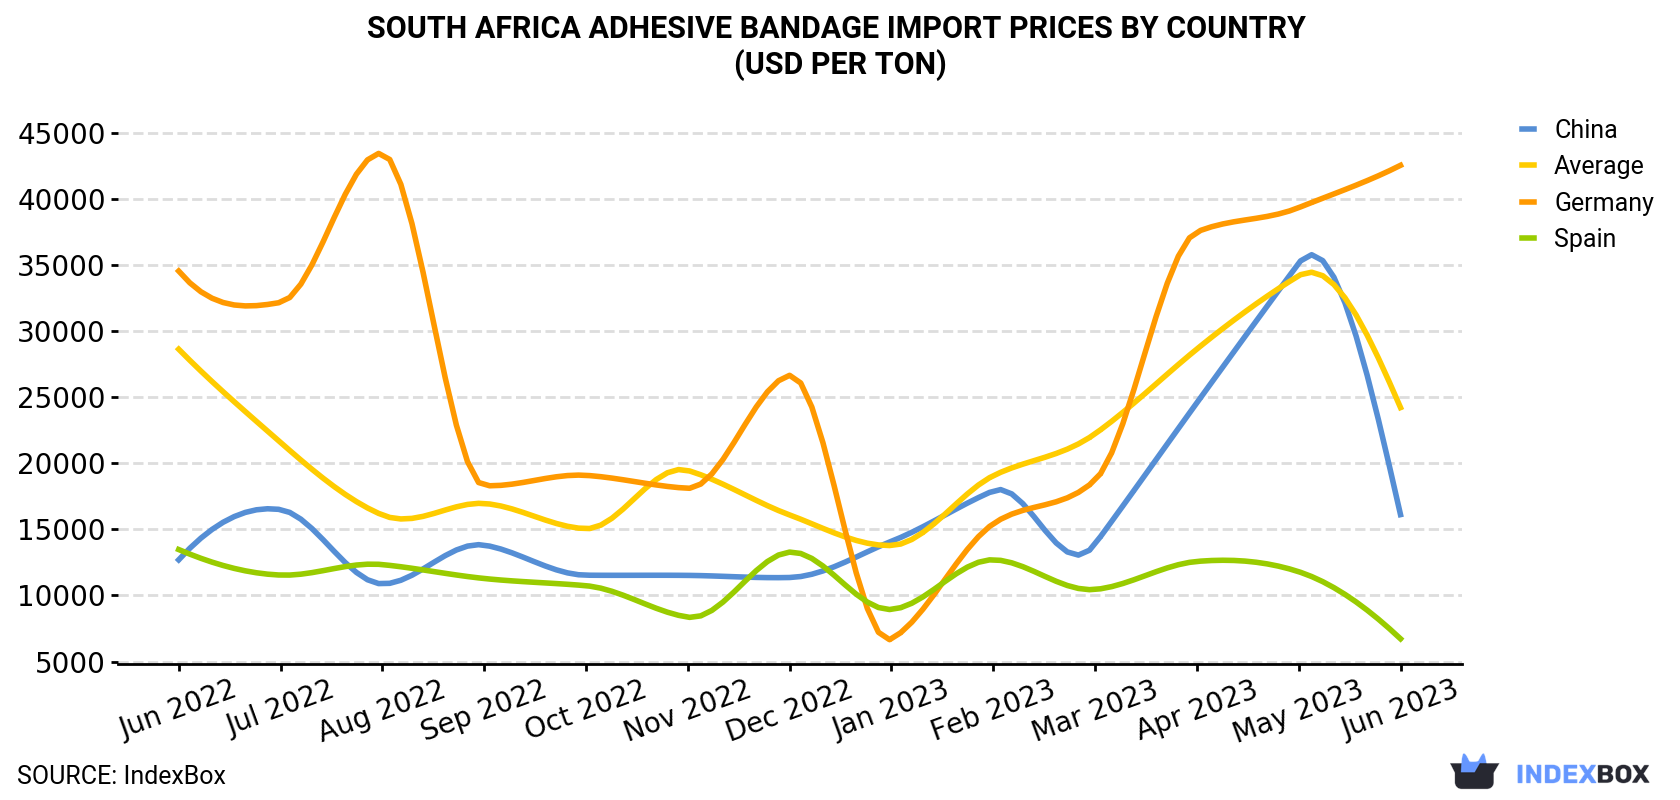 South Africa Adhesive Bandage Import Prices By Country (USD Per Ton)